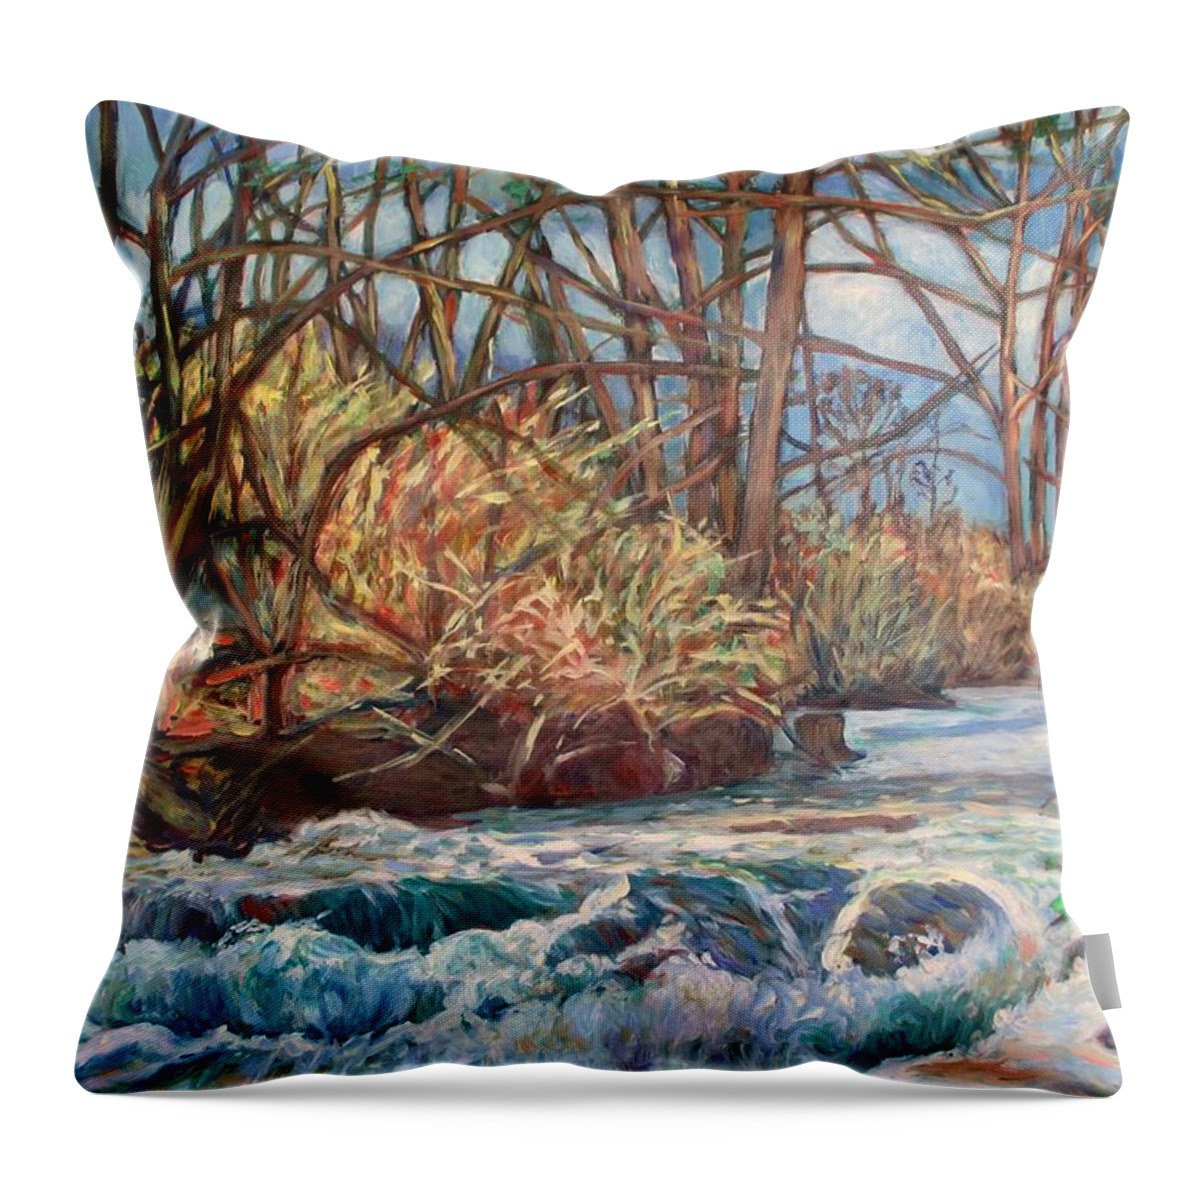 Connellys Run Throw Pillow featuring the painting Connellys Run by Kendall Kessler